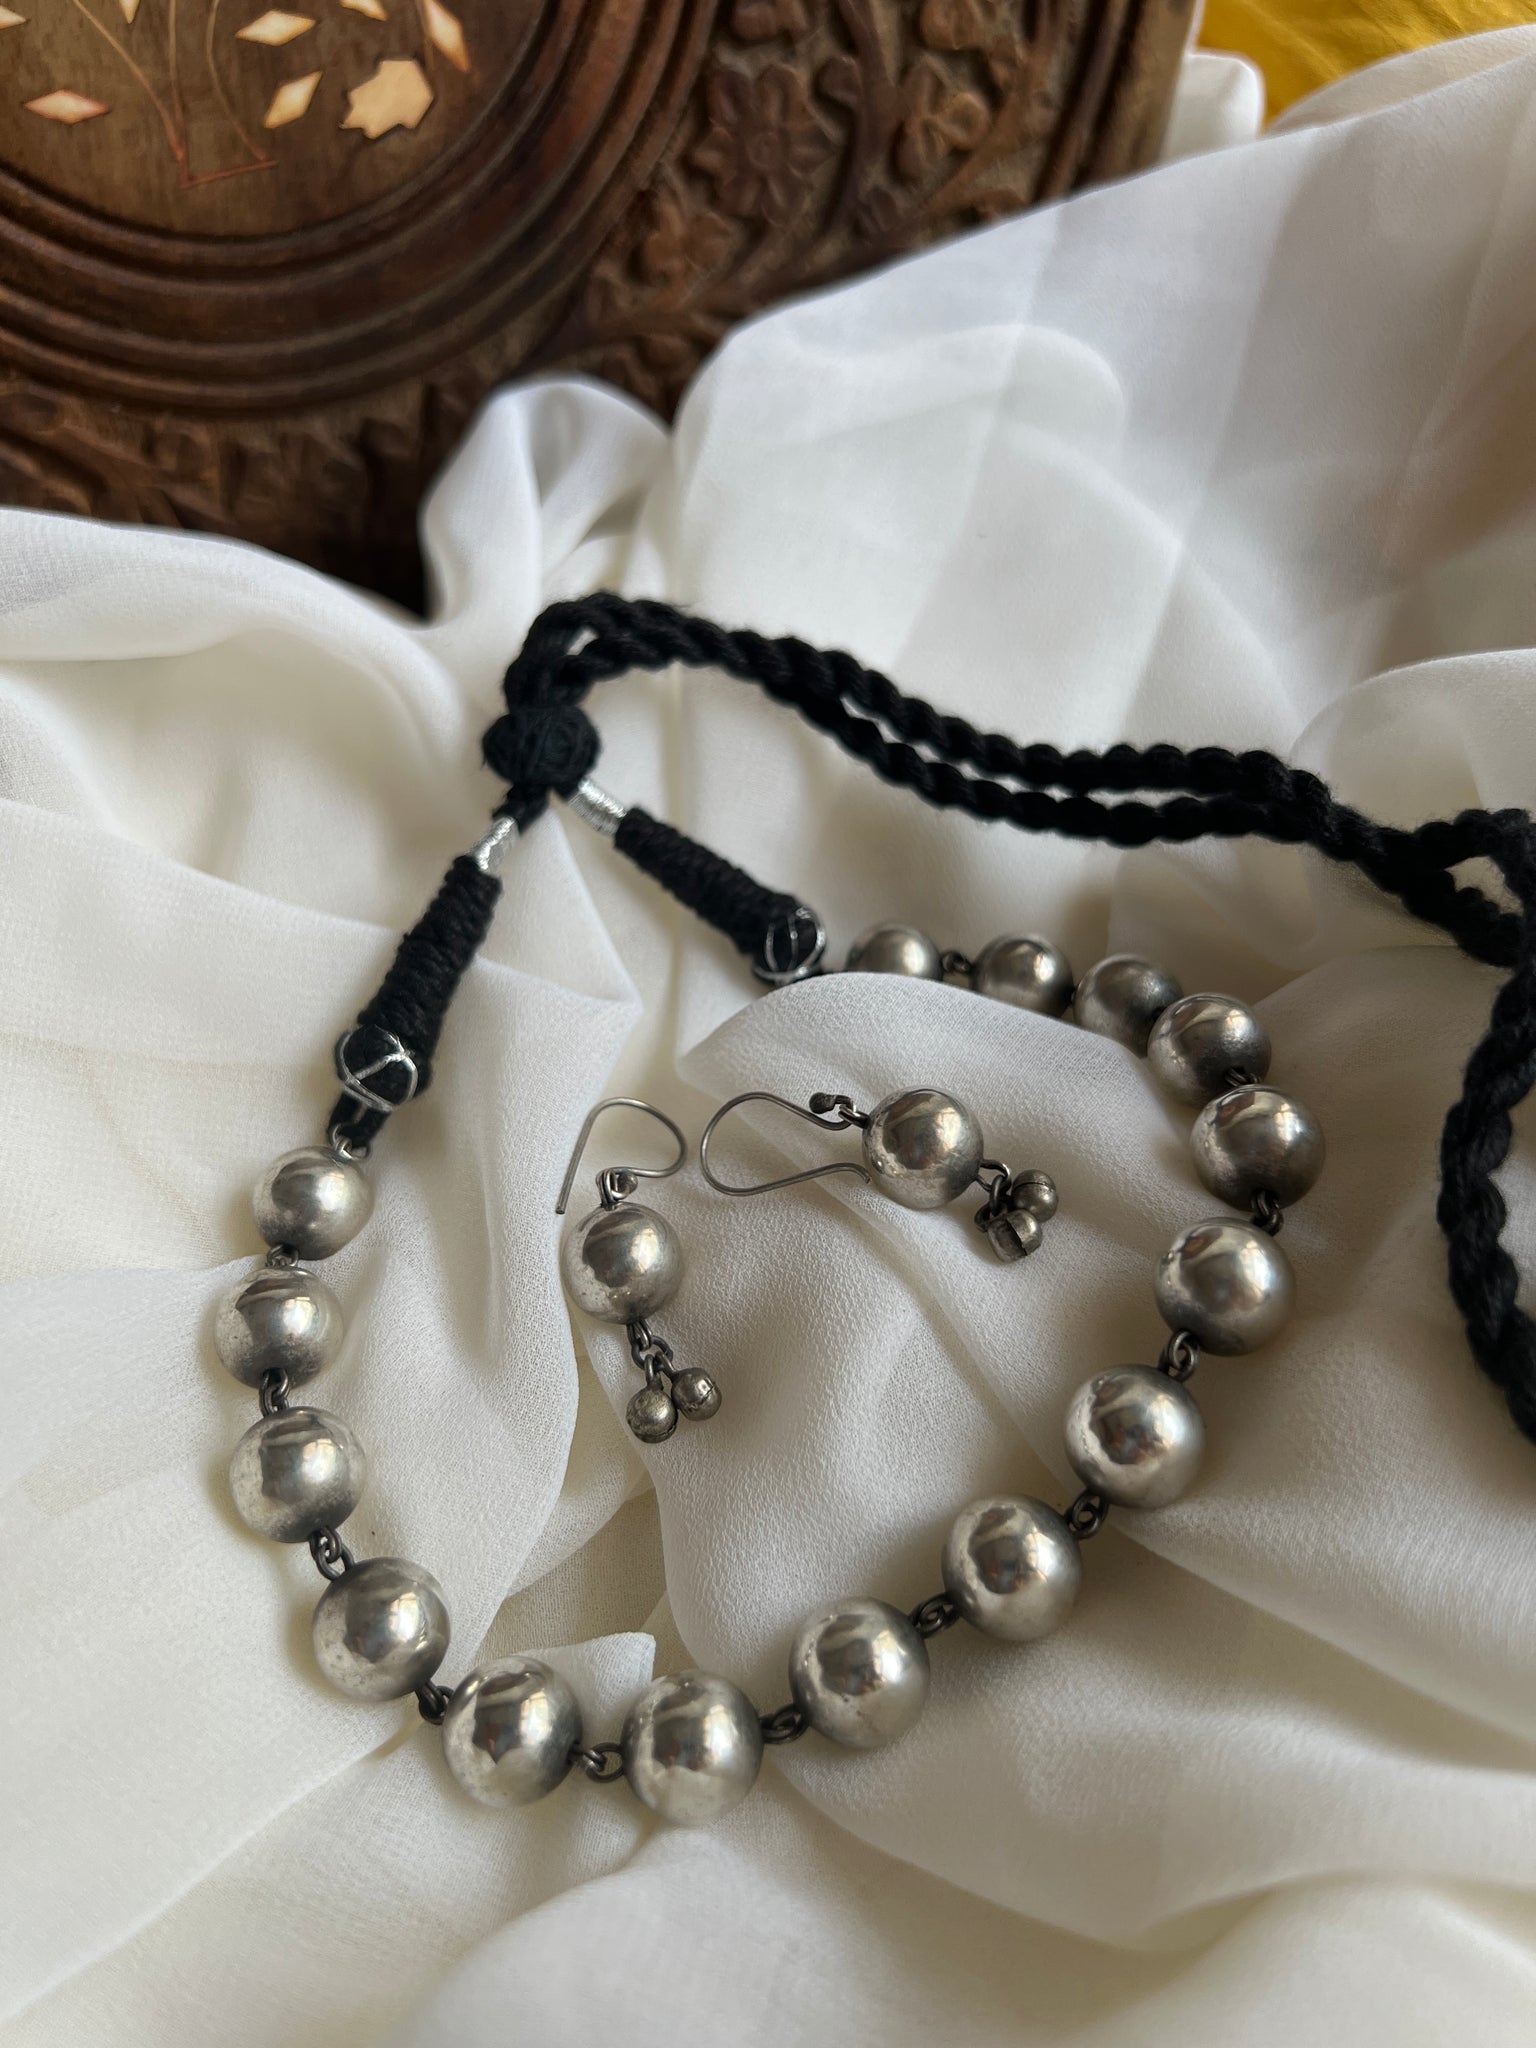 Silver ball necklace with hook earrings